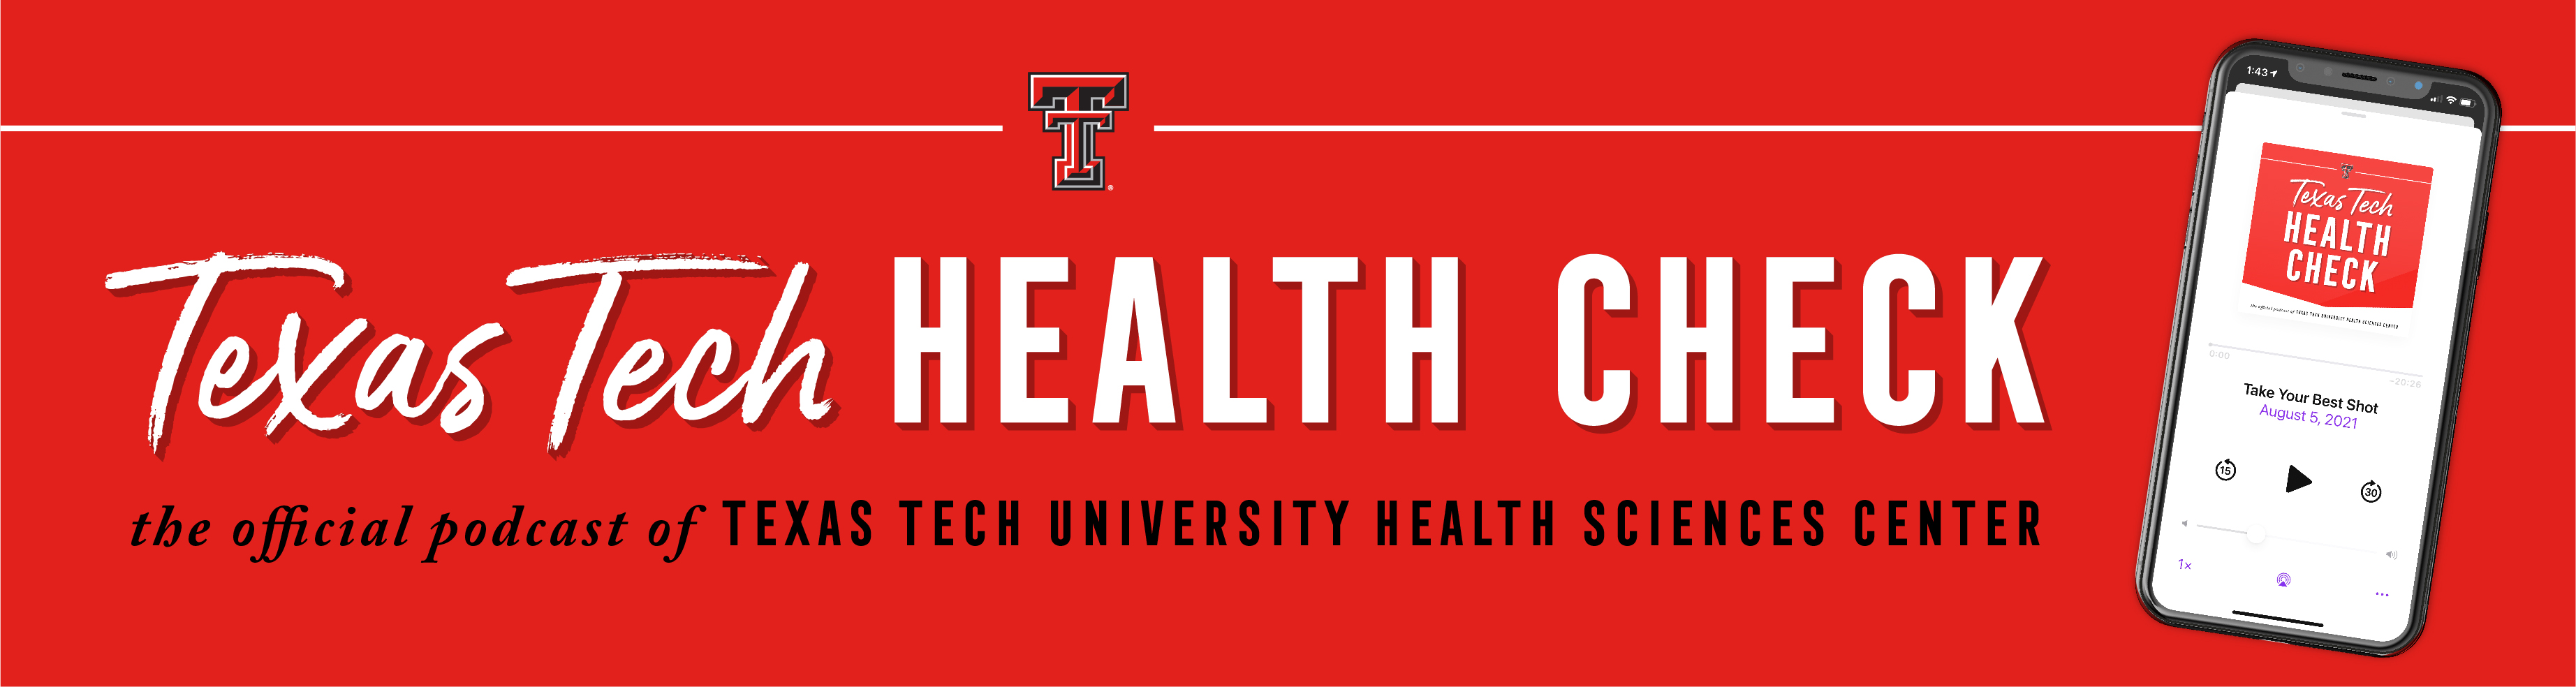 Texas Tech Health Sciences podcast graphic